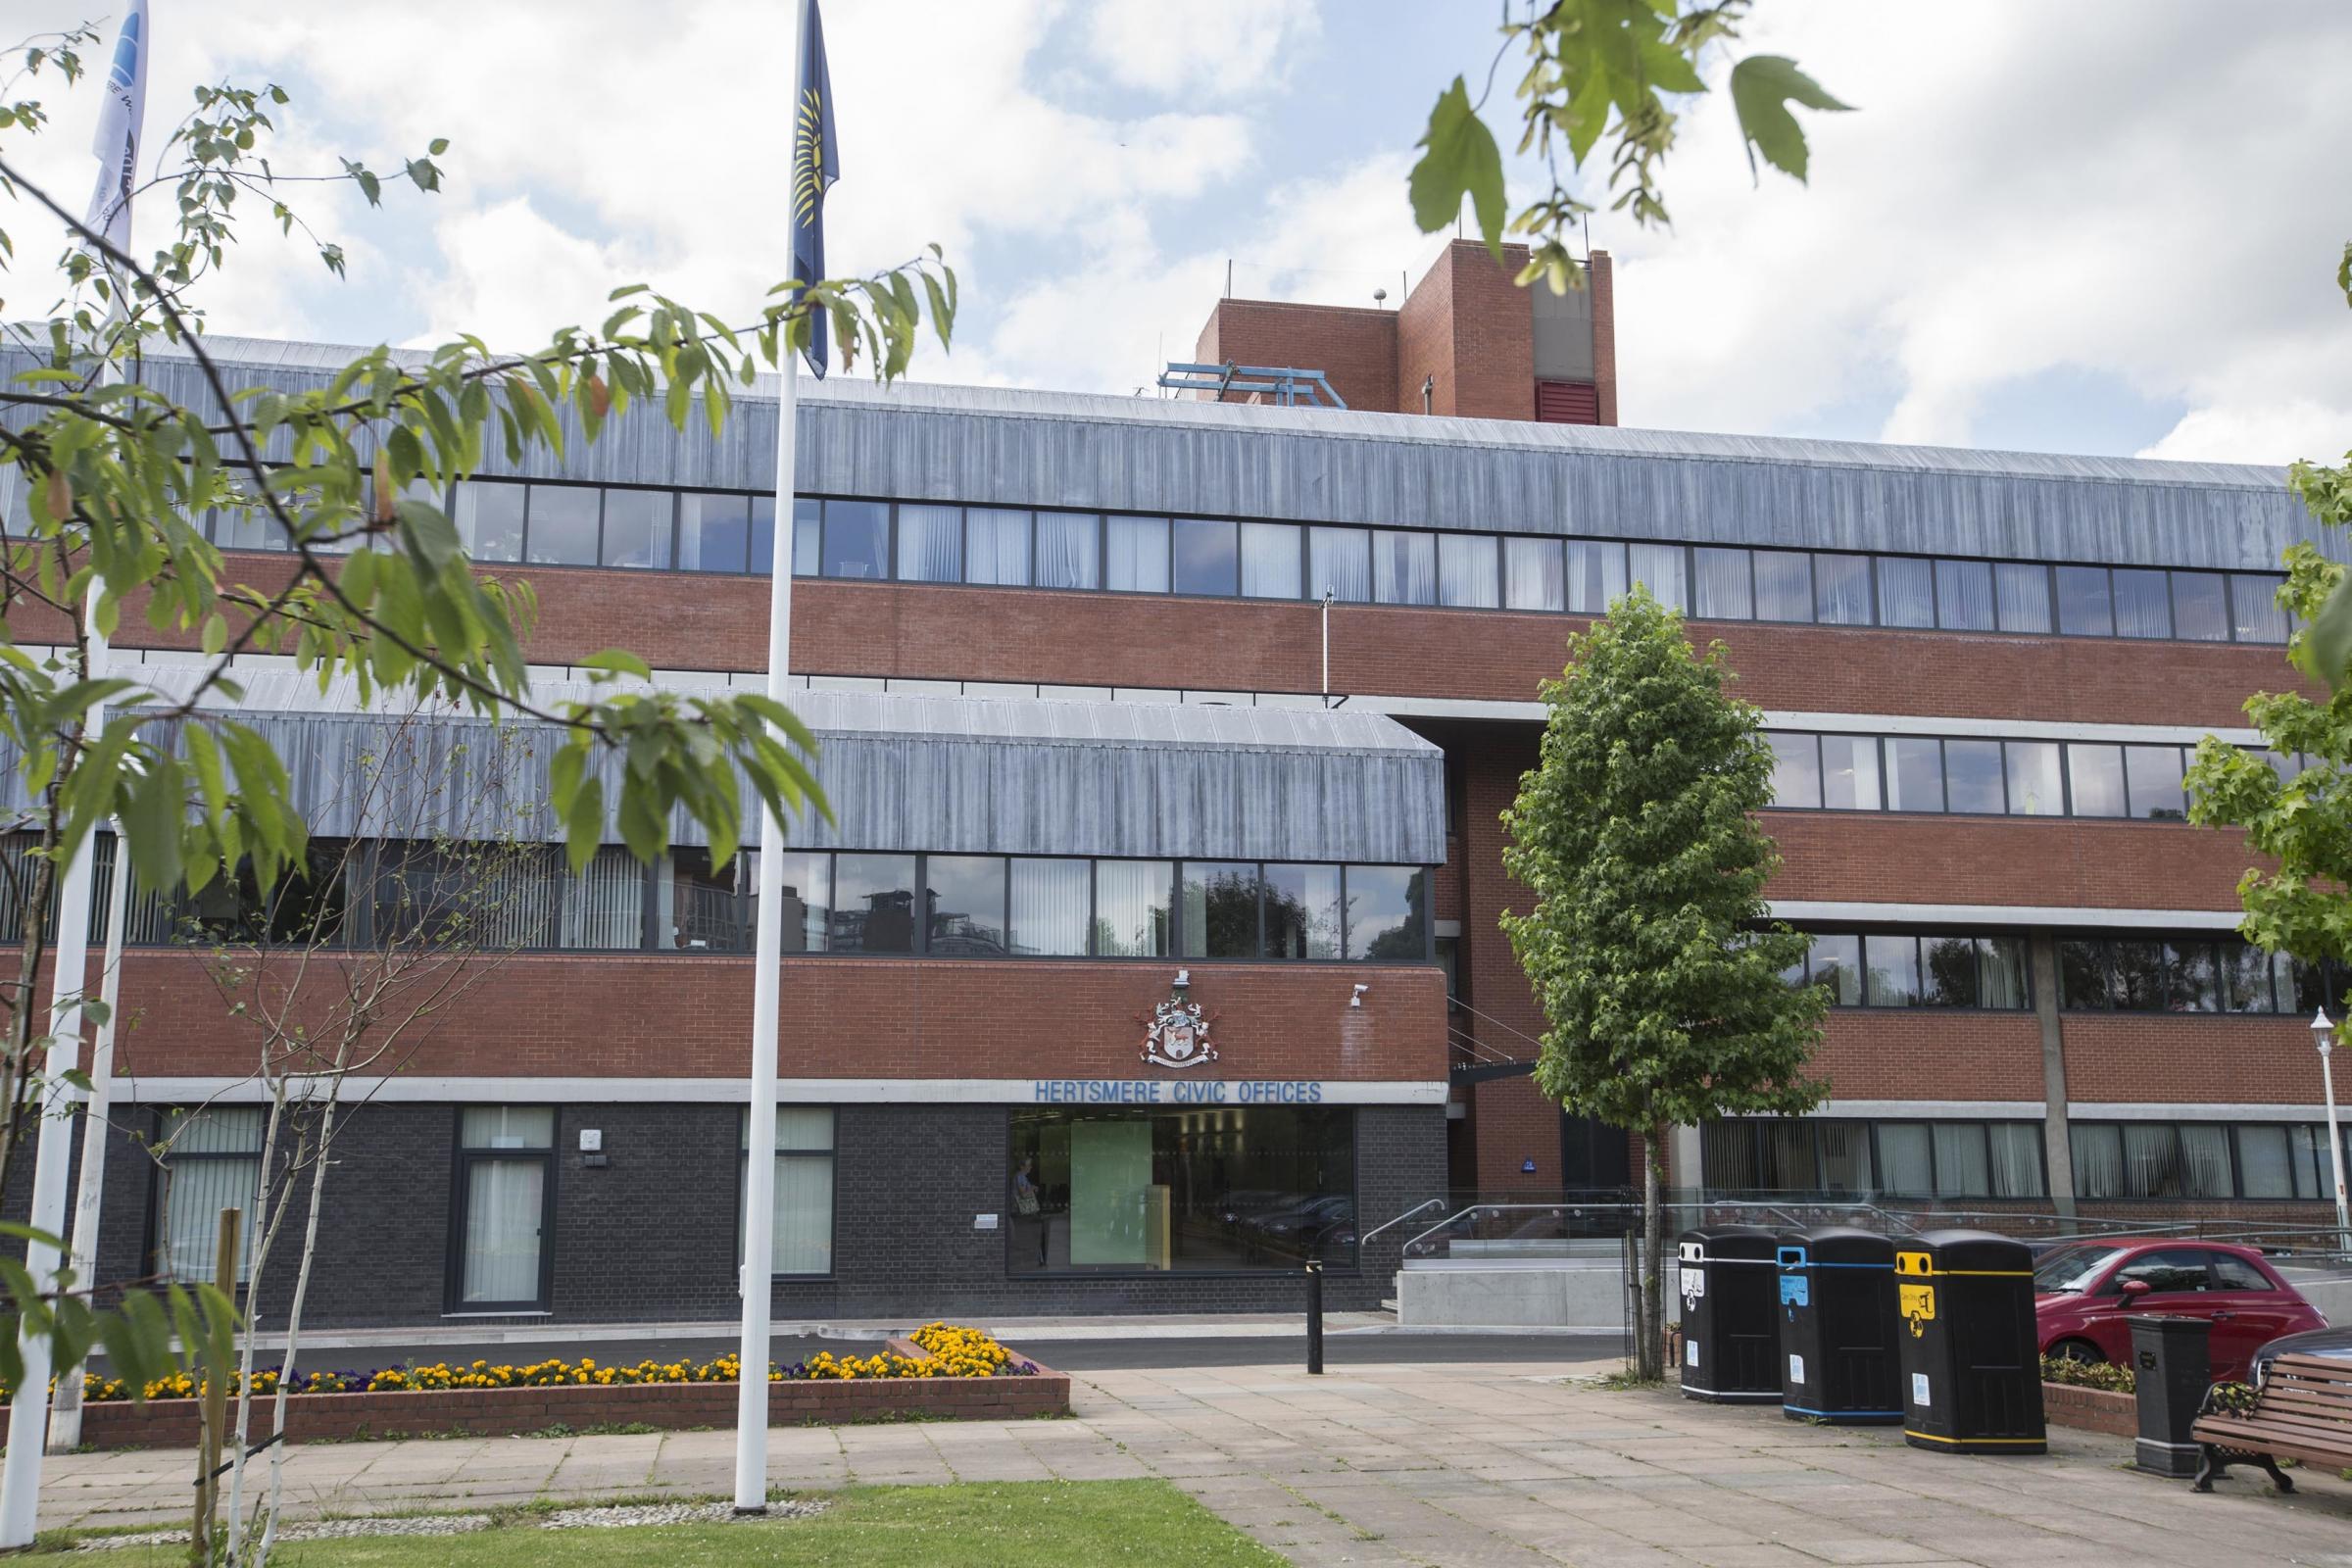 The Executive Committee at Hertsmere Borough Council, offices in Borehamwood pictured, agreed to a series of recommendations at a meeting on Wednesday June 9